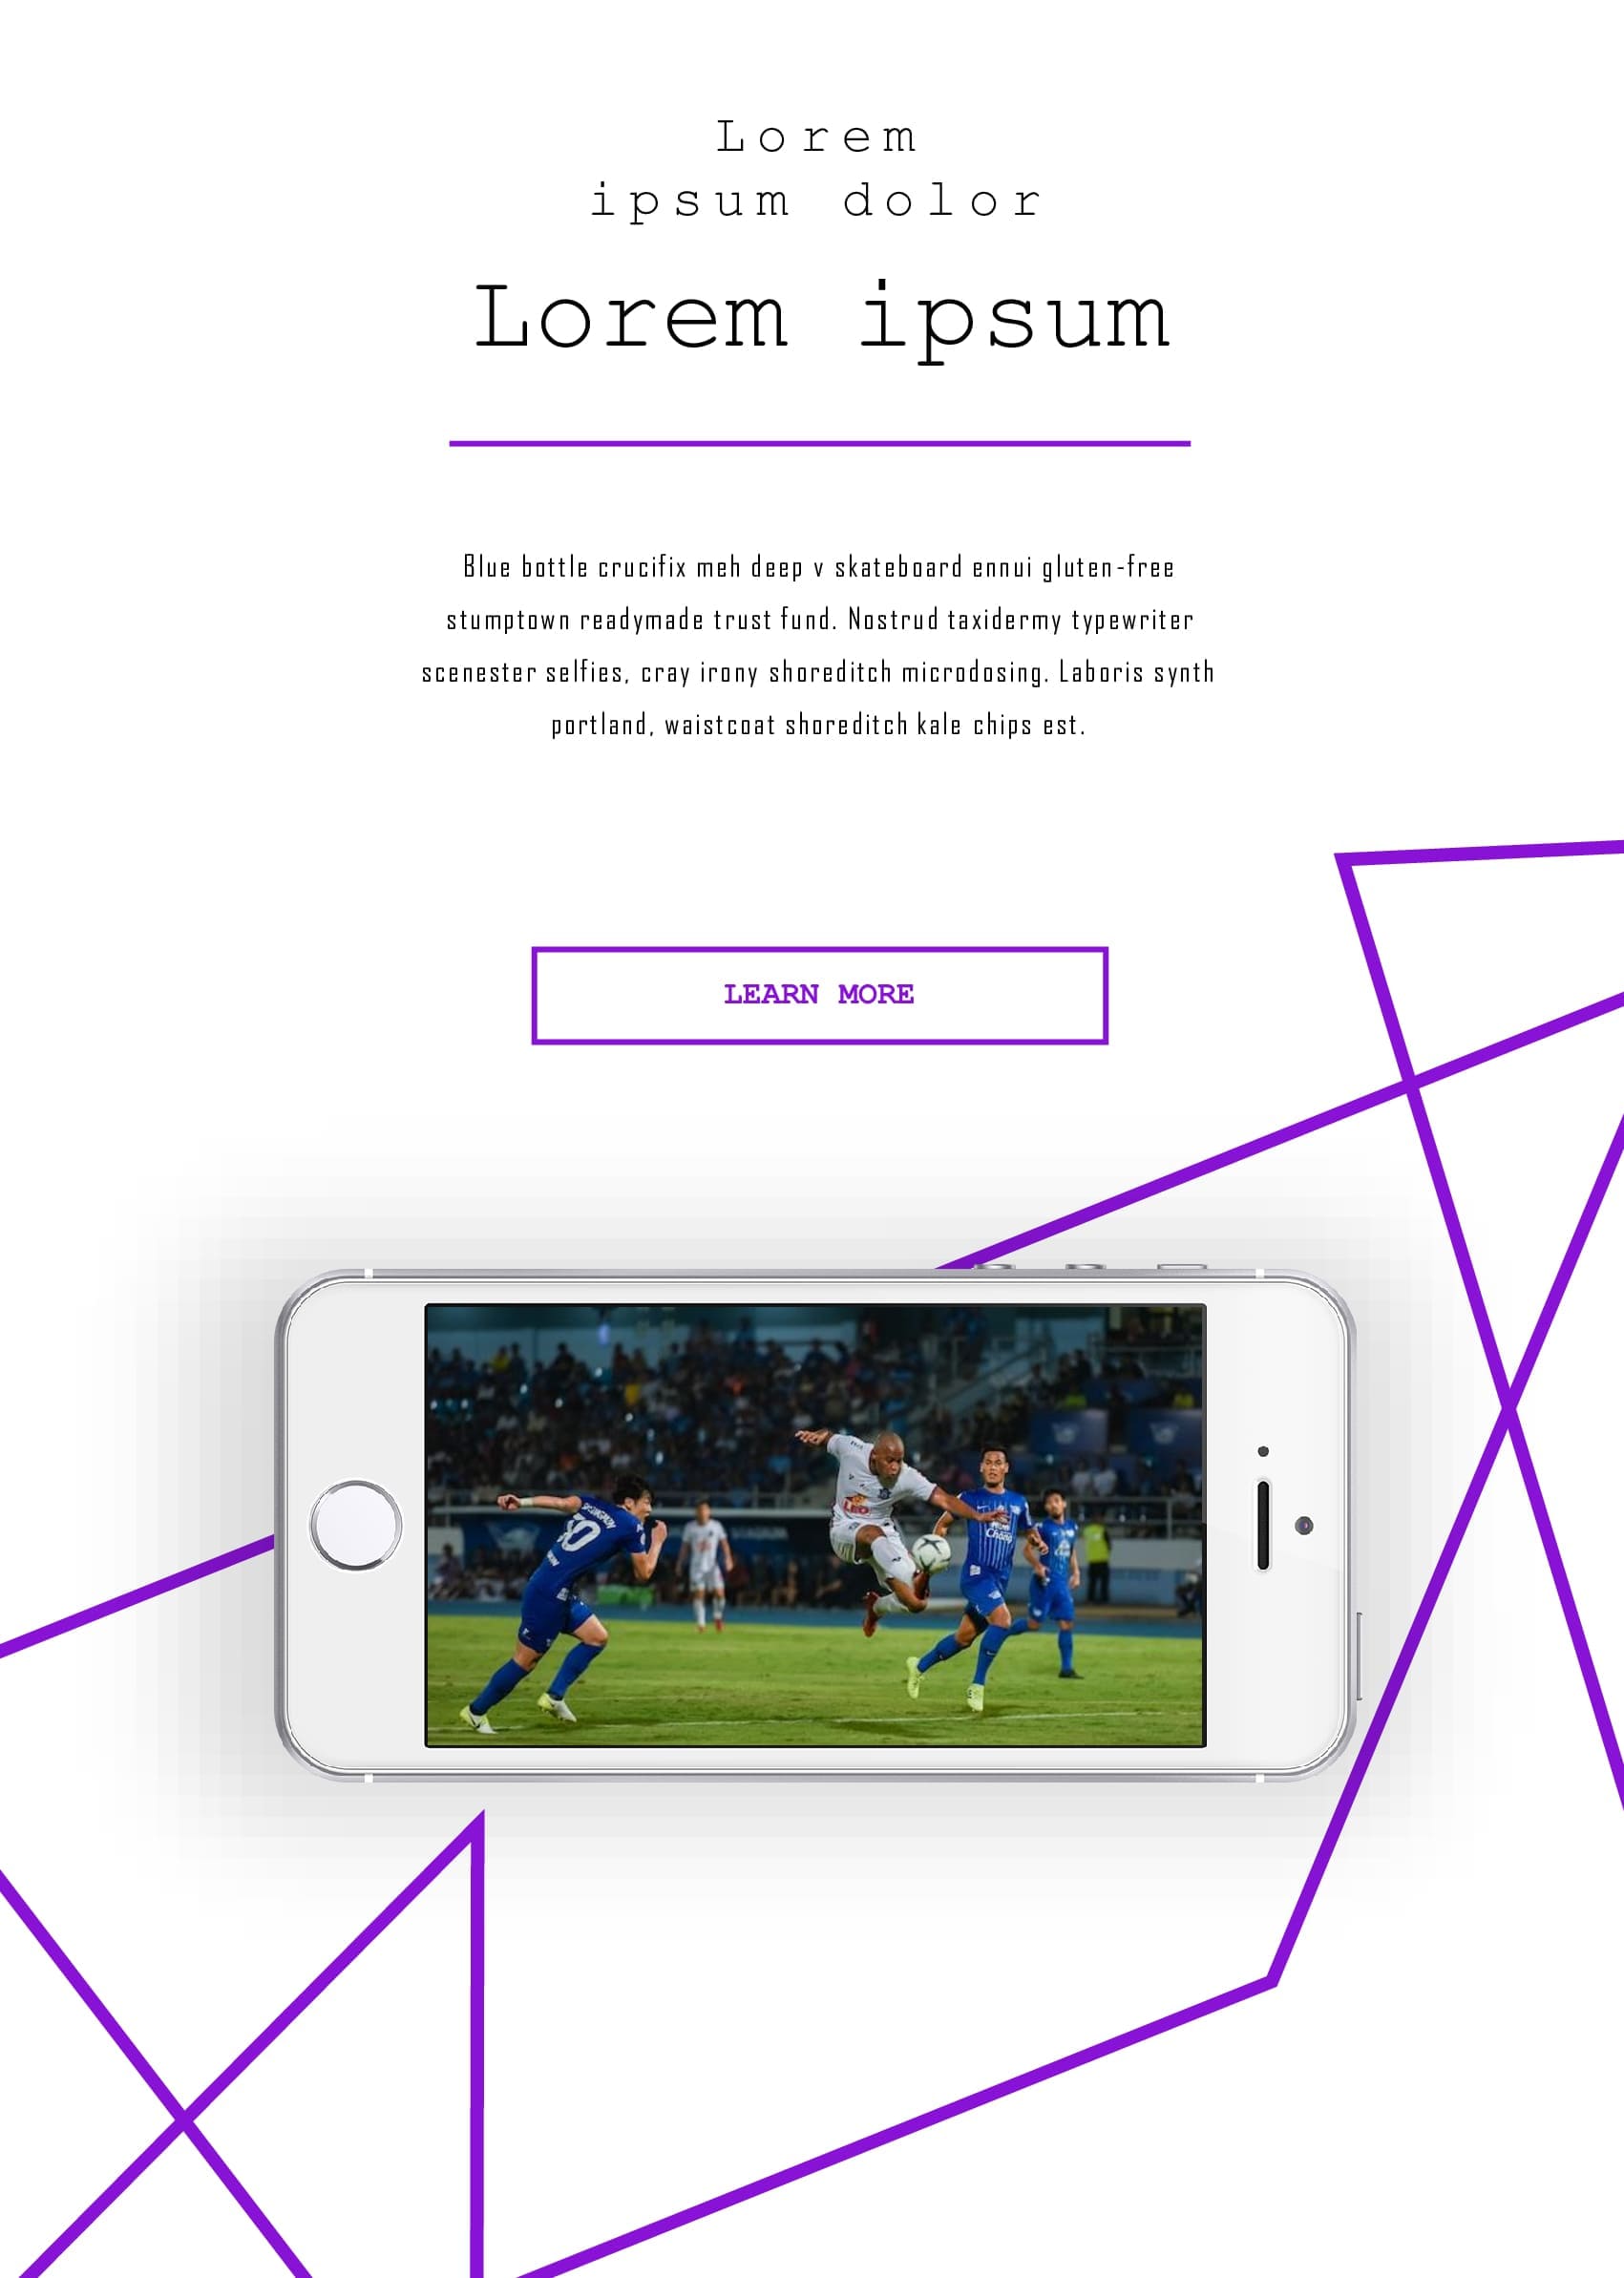 Preview Soccer Match Presentation Template: 50 Slides on the mobile.